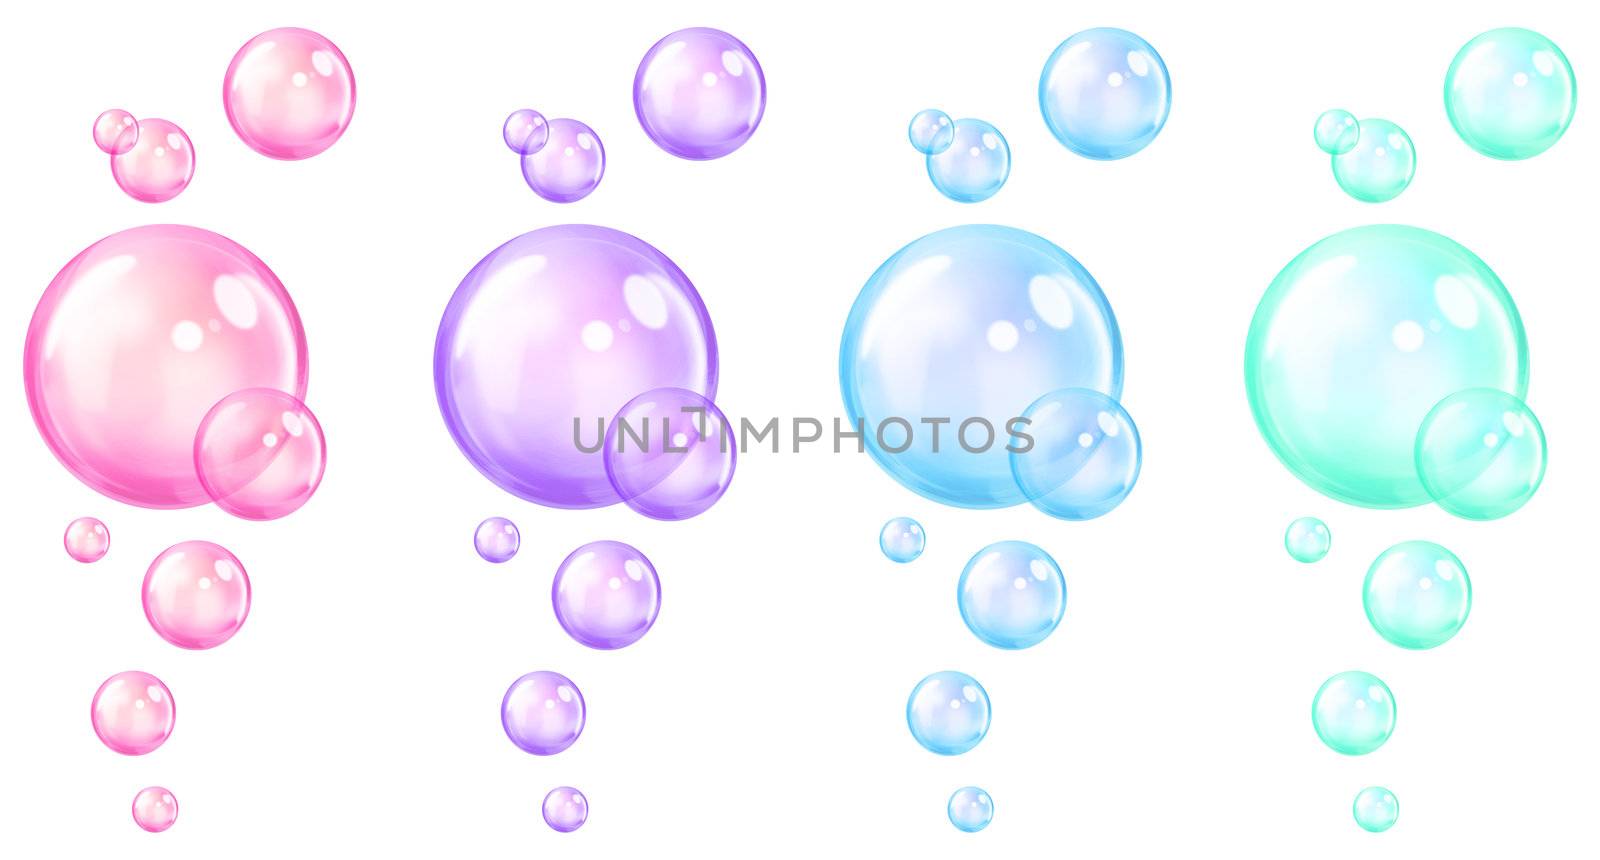 Cartoon bubbles in a variety of colors.